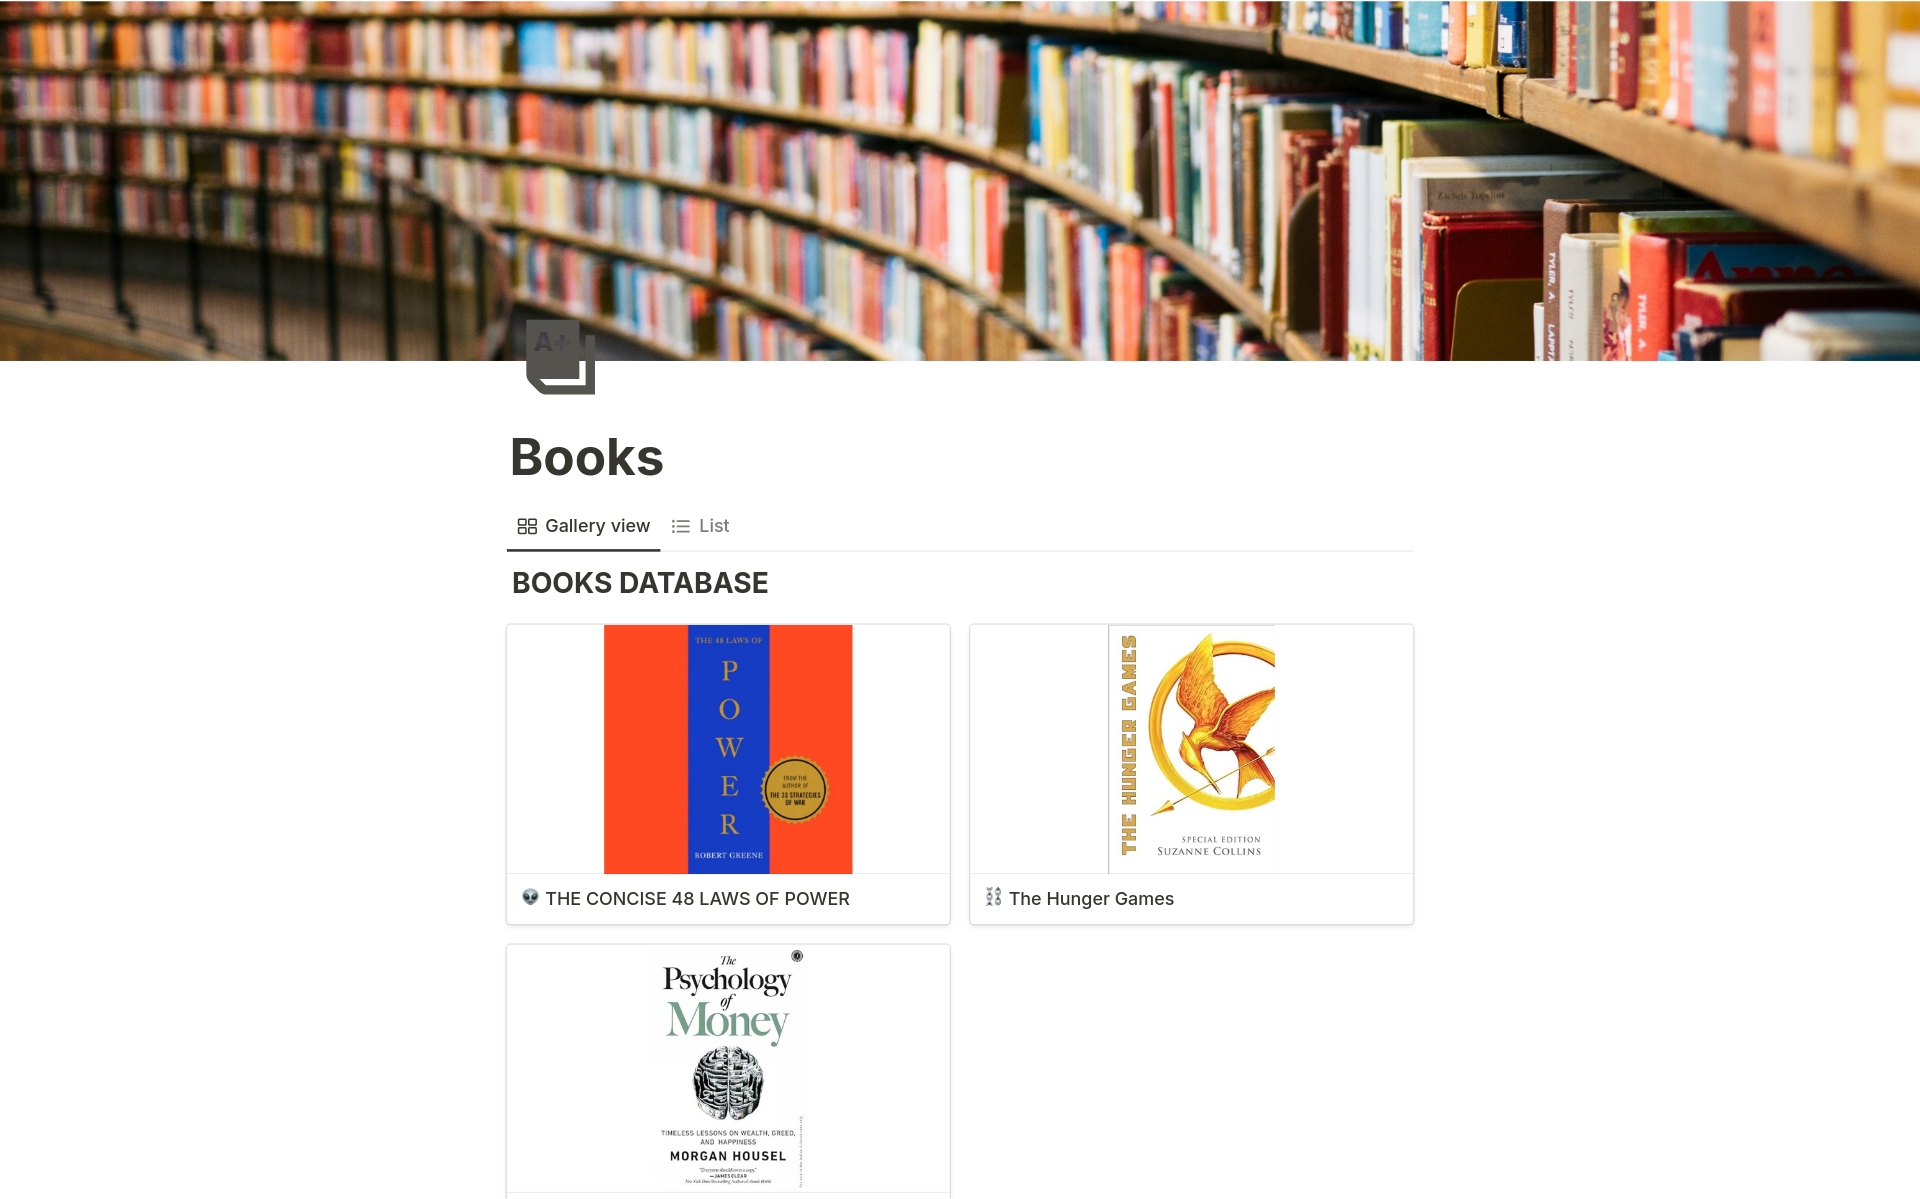 Organize your books neatly with a clean visual UI and list for easy access
